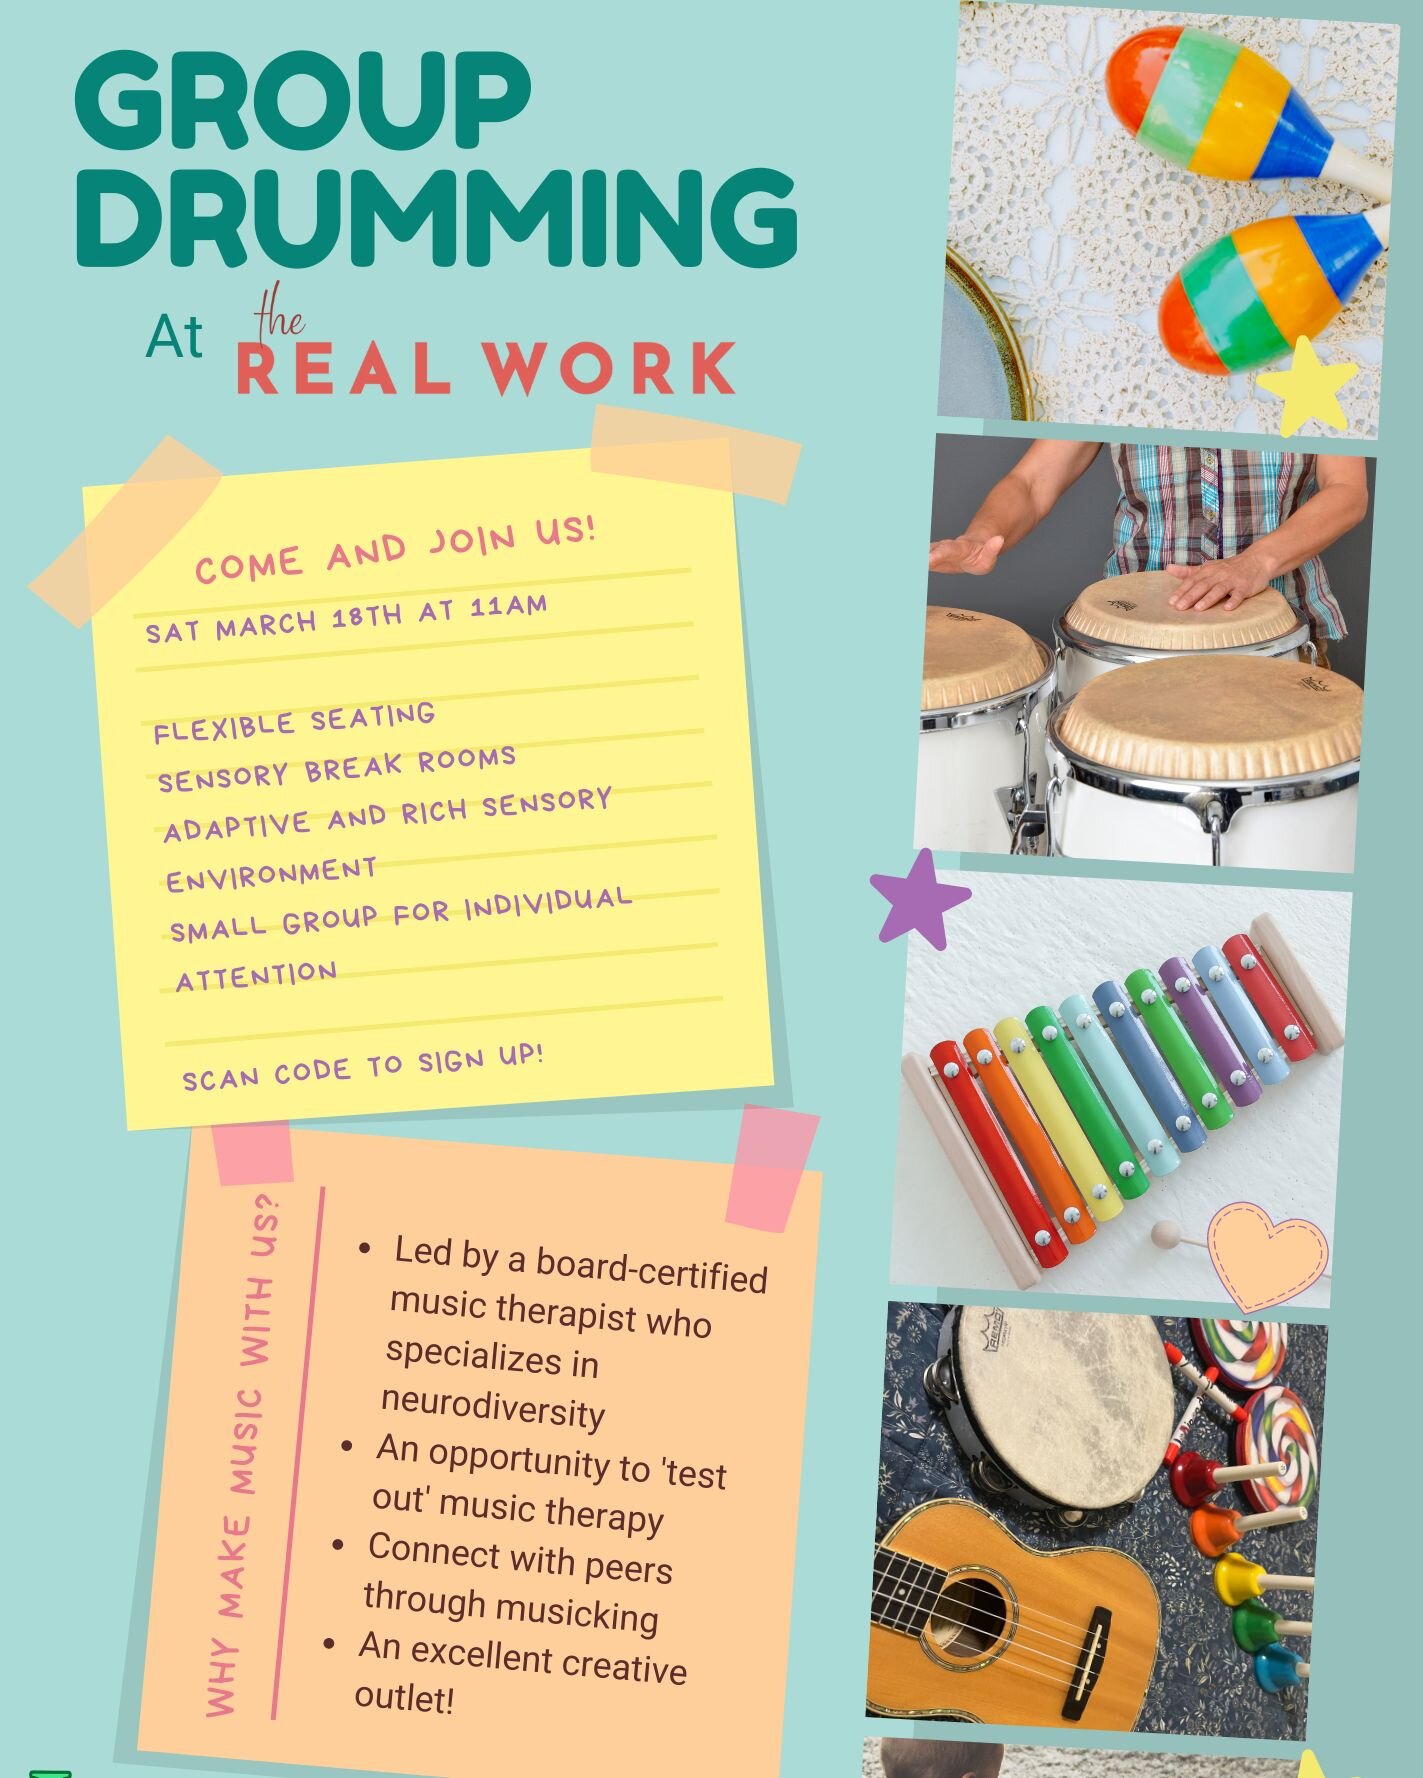 We're partnering up with The Real Work! Come join us Saturday, March 18th at 11am for a group drumming activity for neurodivergent children and teens. Sign up at https://rebekahsprings.ck.page/5b9e2fb9c4

Picture description: Blue flyer with pictures